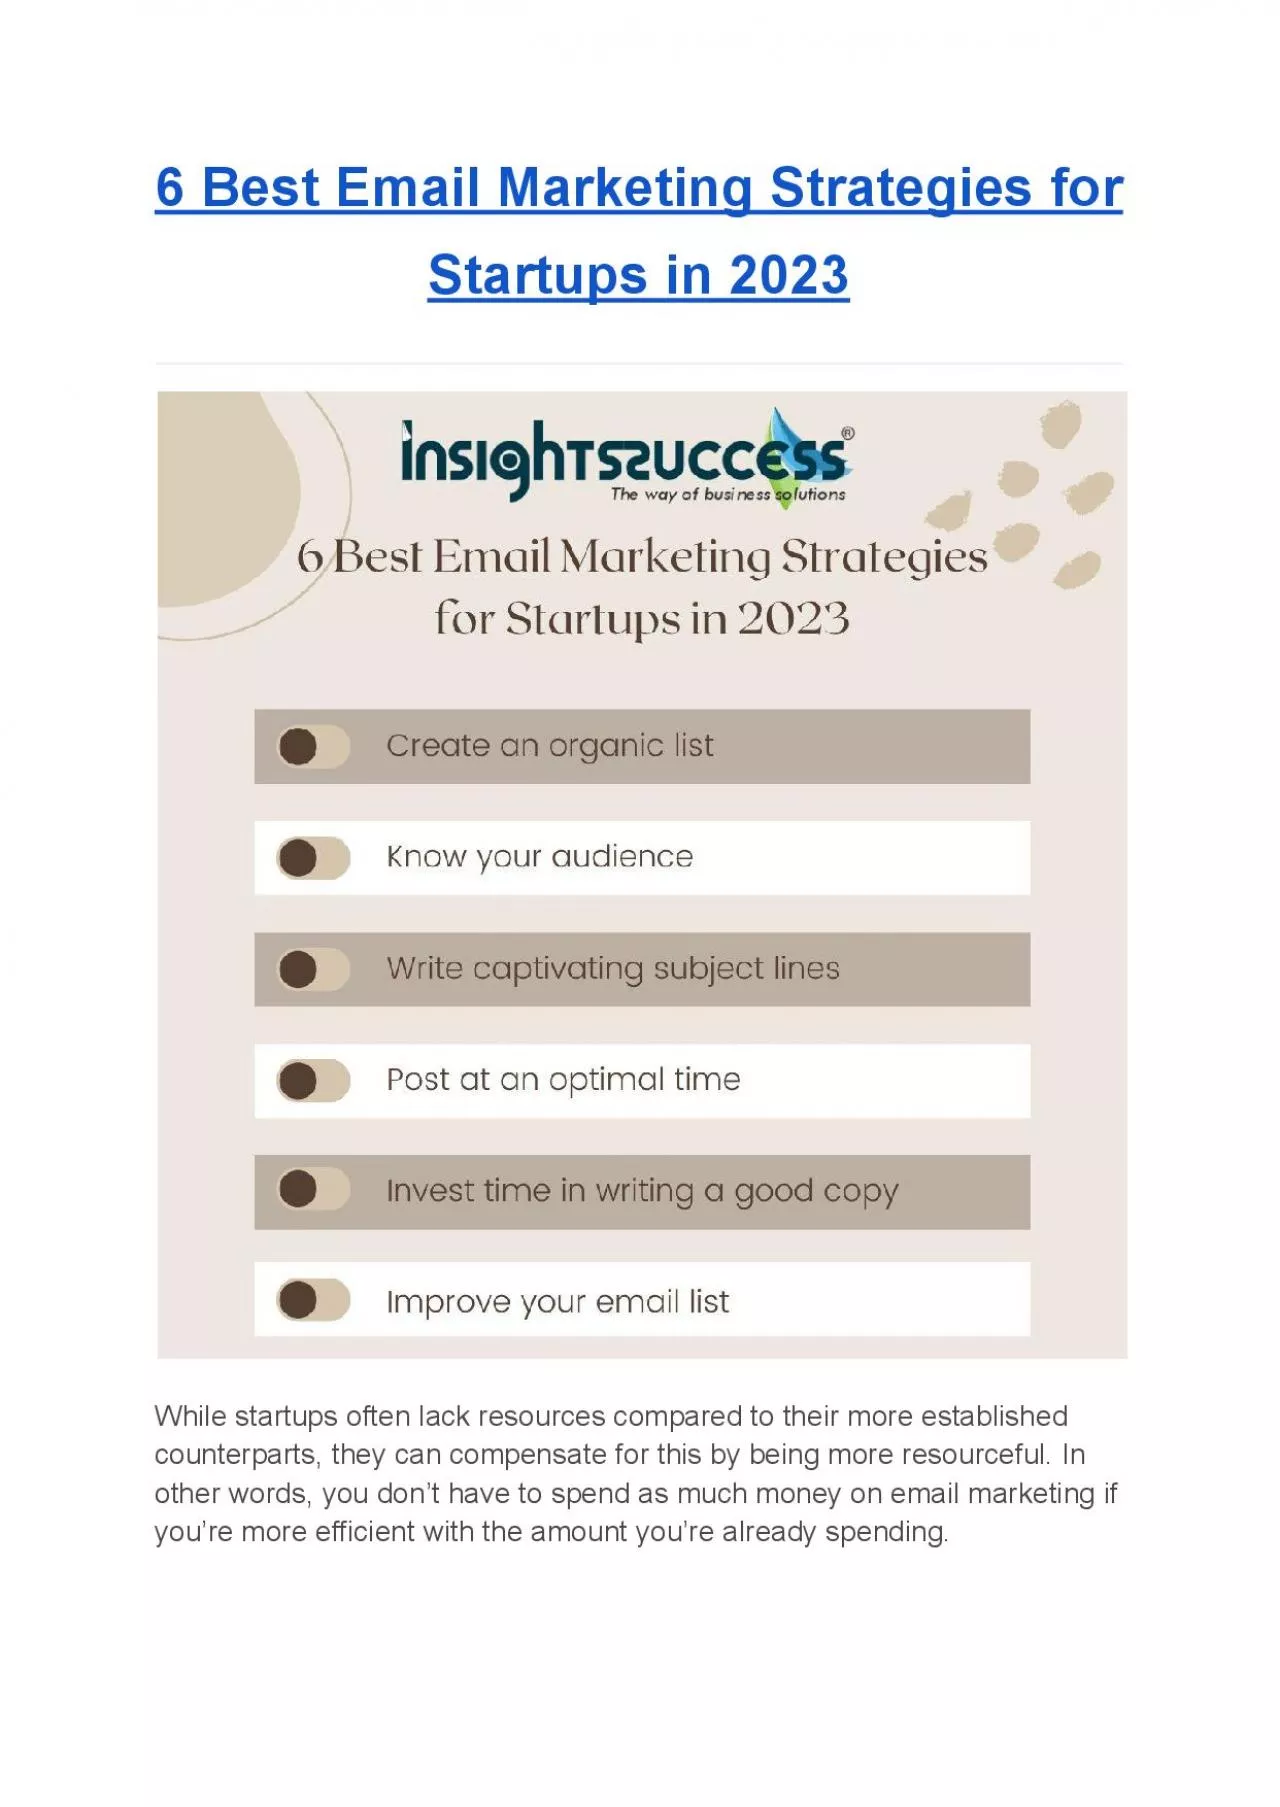 6 Best Email Marketing Strategies for Startups in 2023